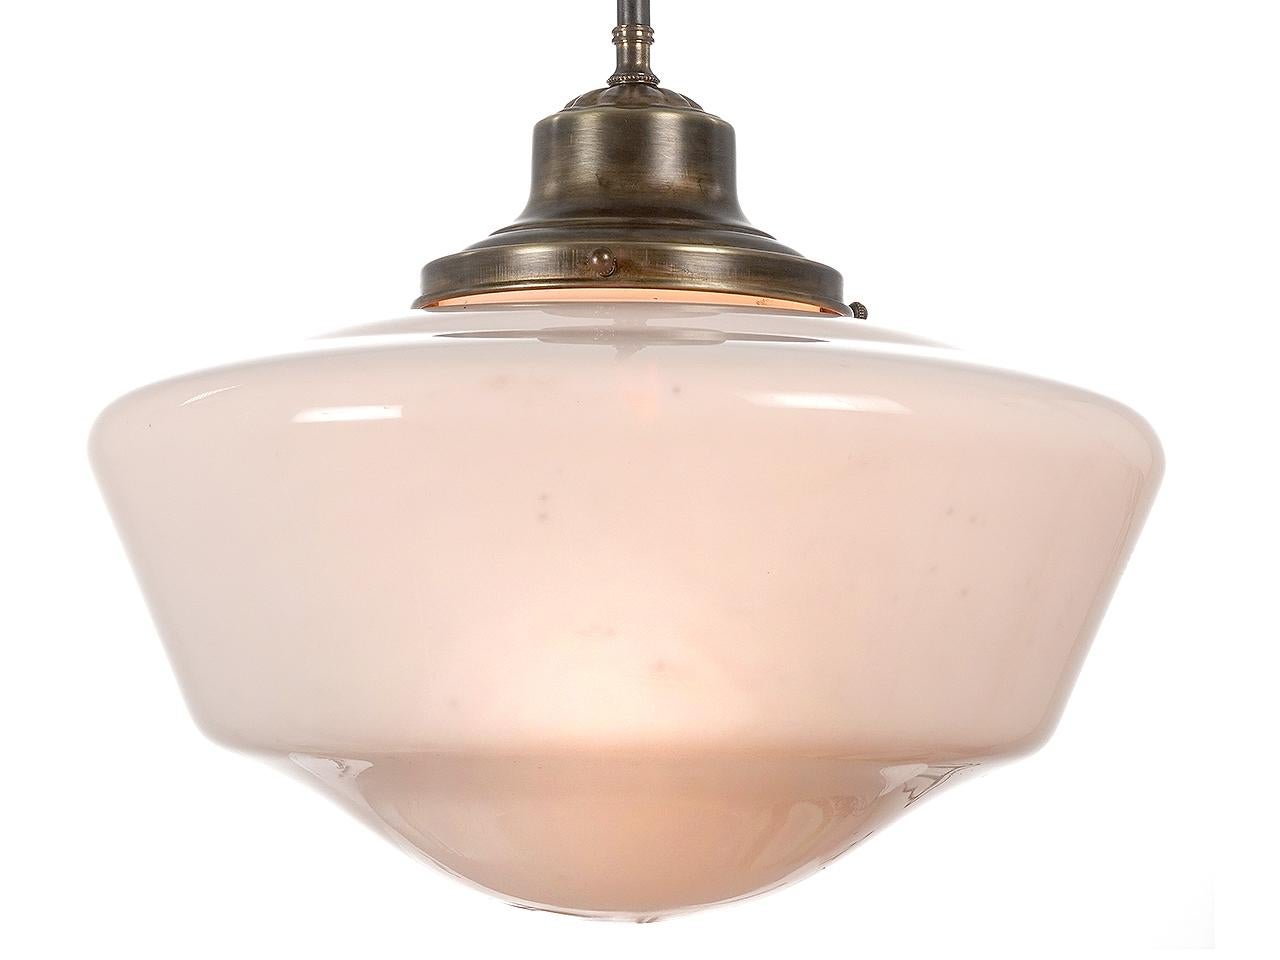 This large 16 inch diameter School House fixture is the quintessential industrial lamp. They were mostly found in schools, commercial buildings and restaurants from the 20s to 1950s. This fixture gave off a nice even light and blended with all